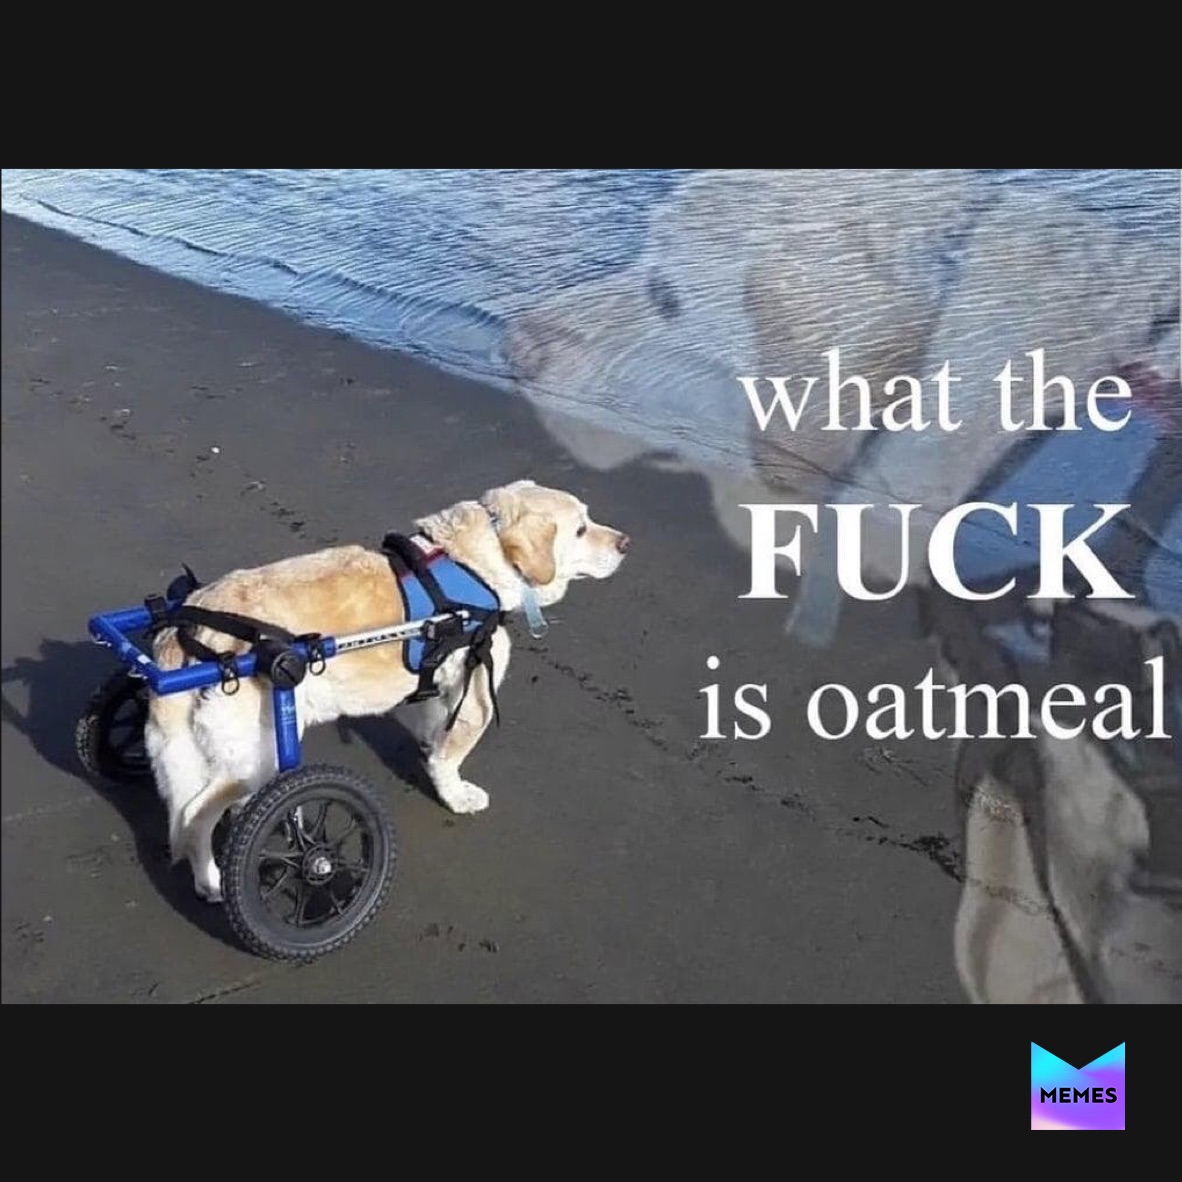 What the fuck is oatmeal